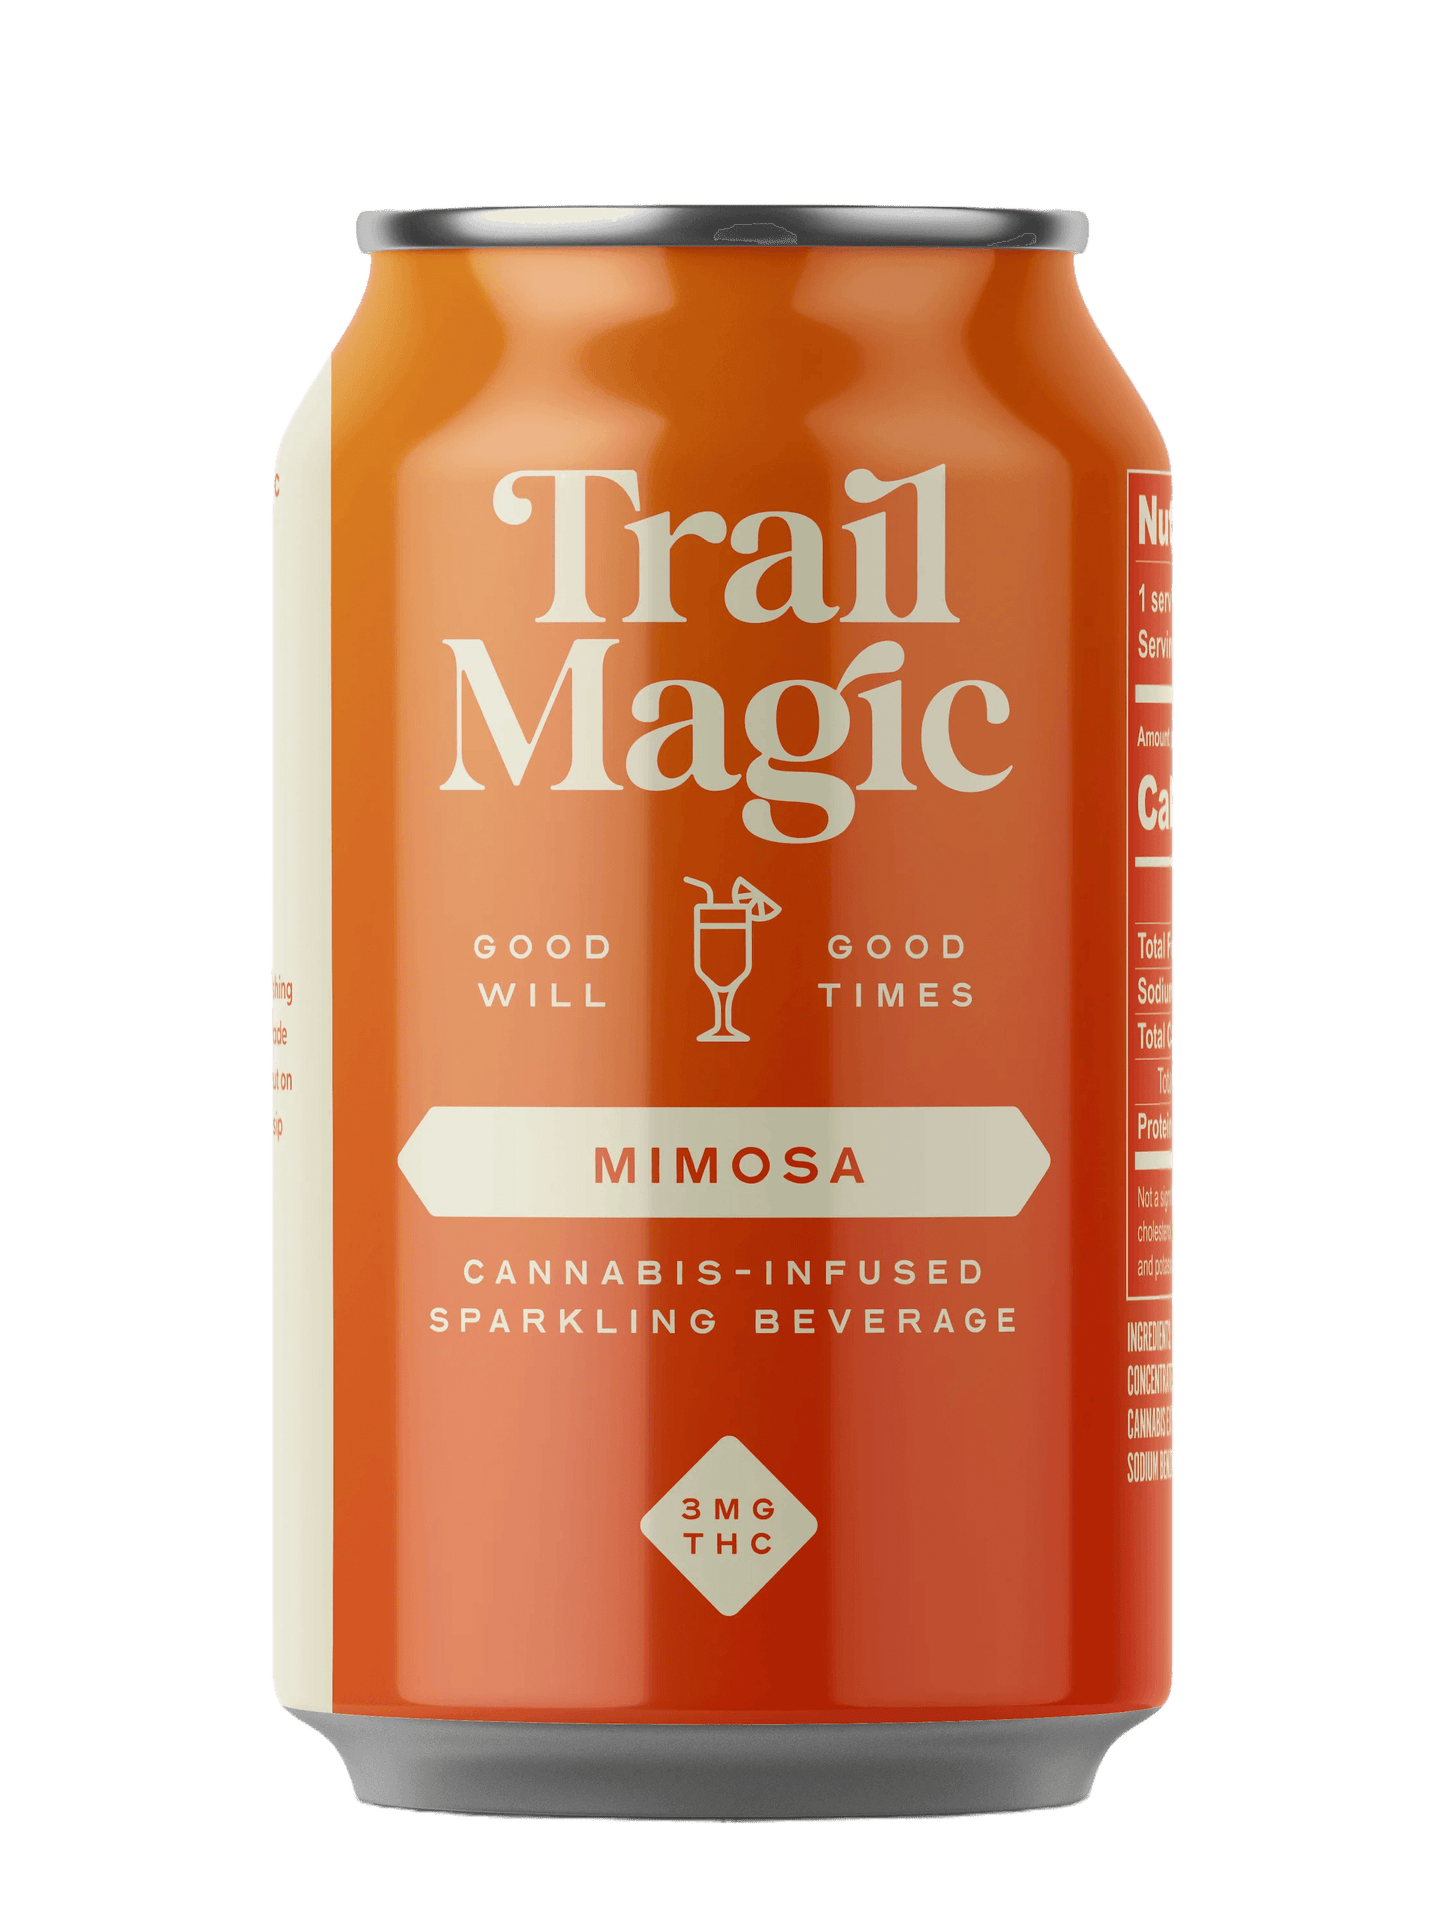 Mimosa (4 pack)